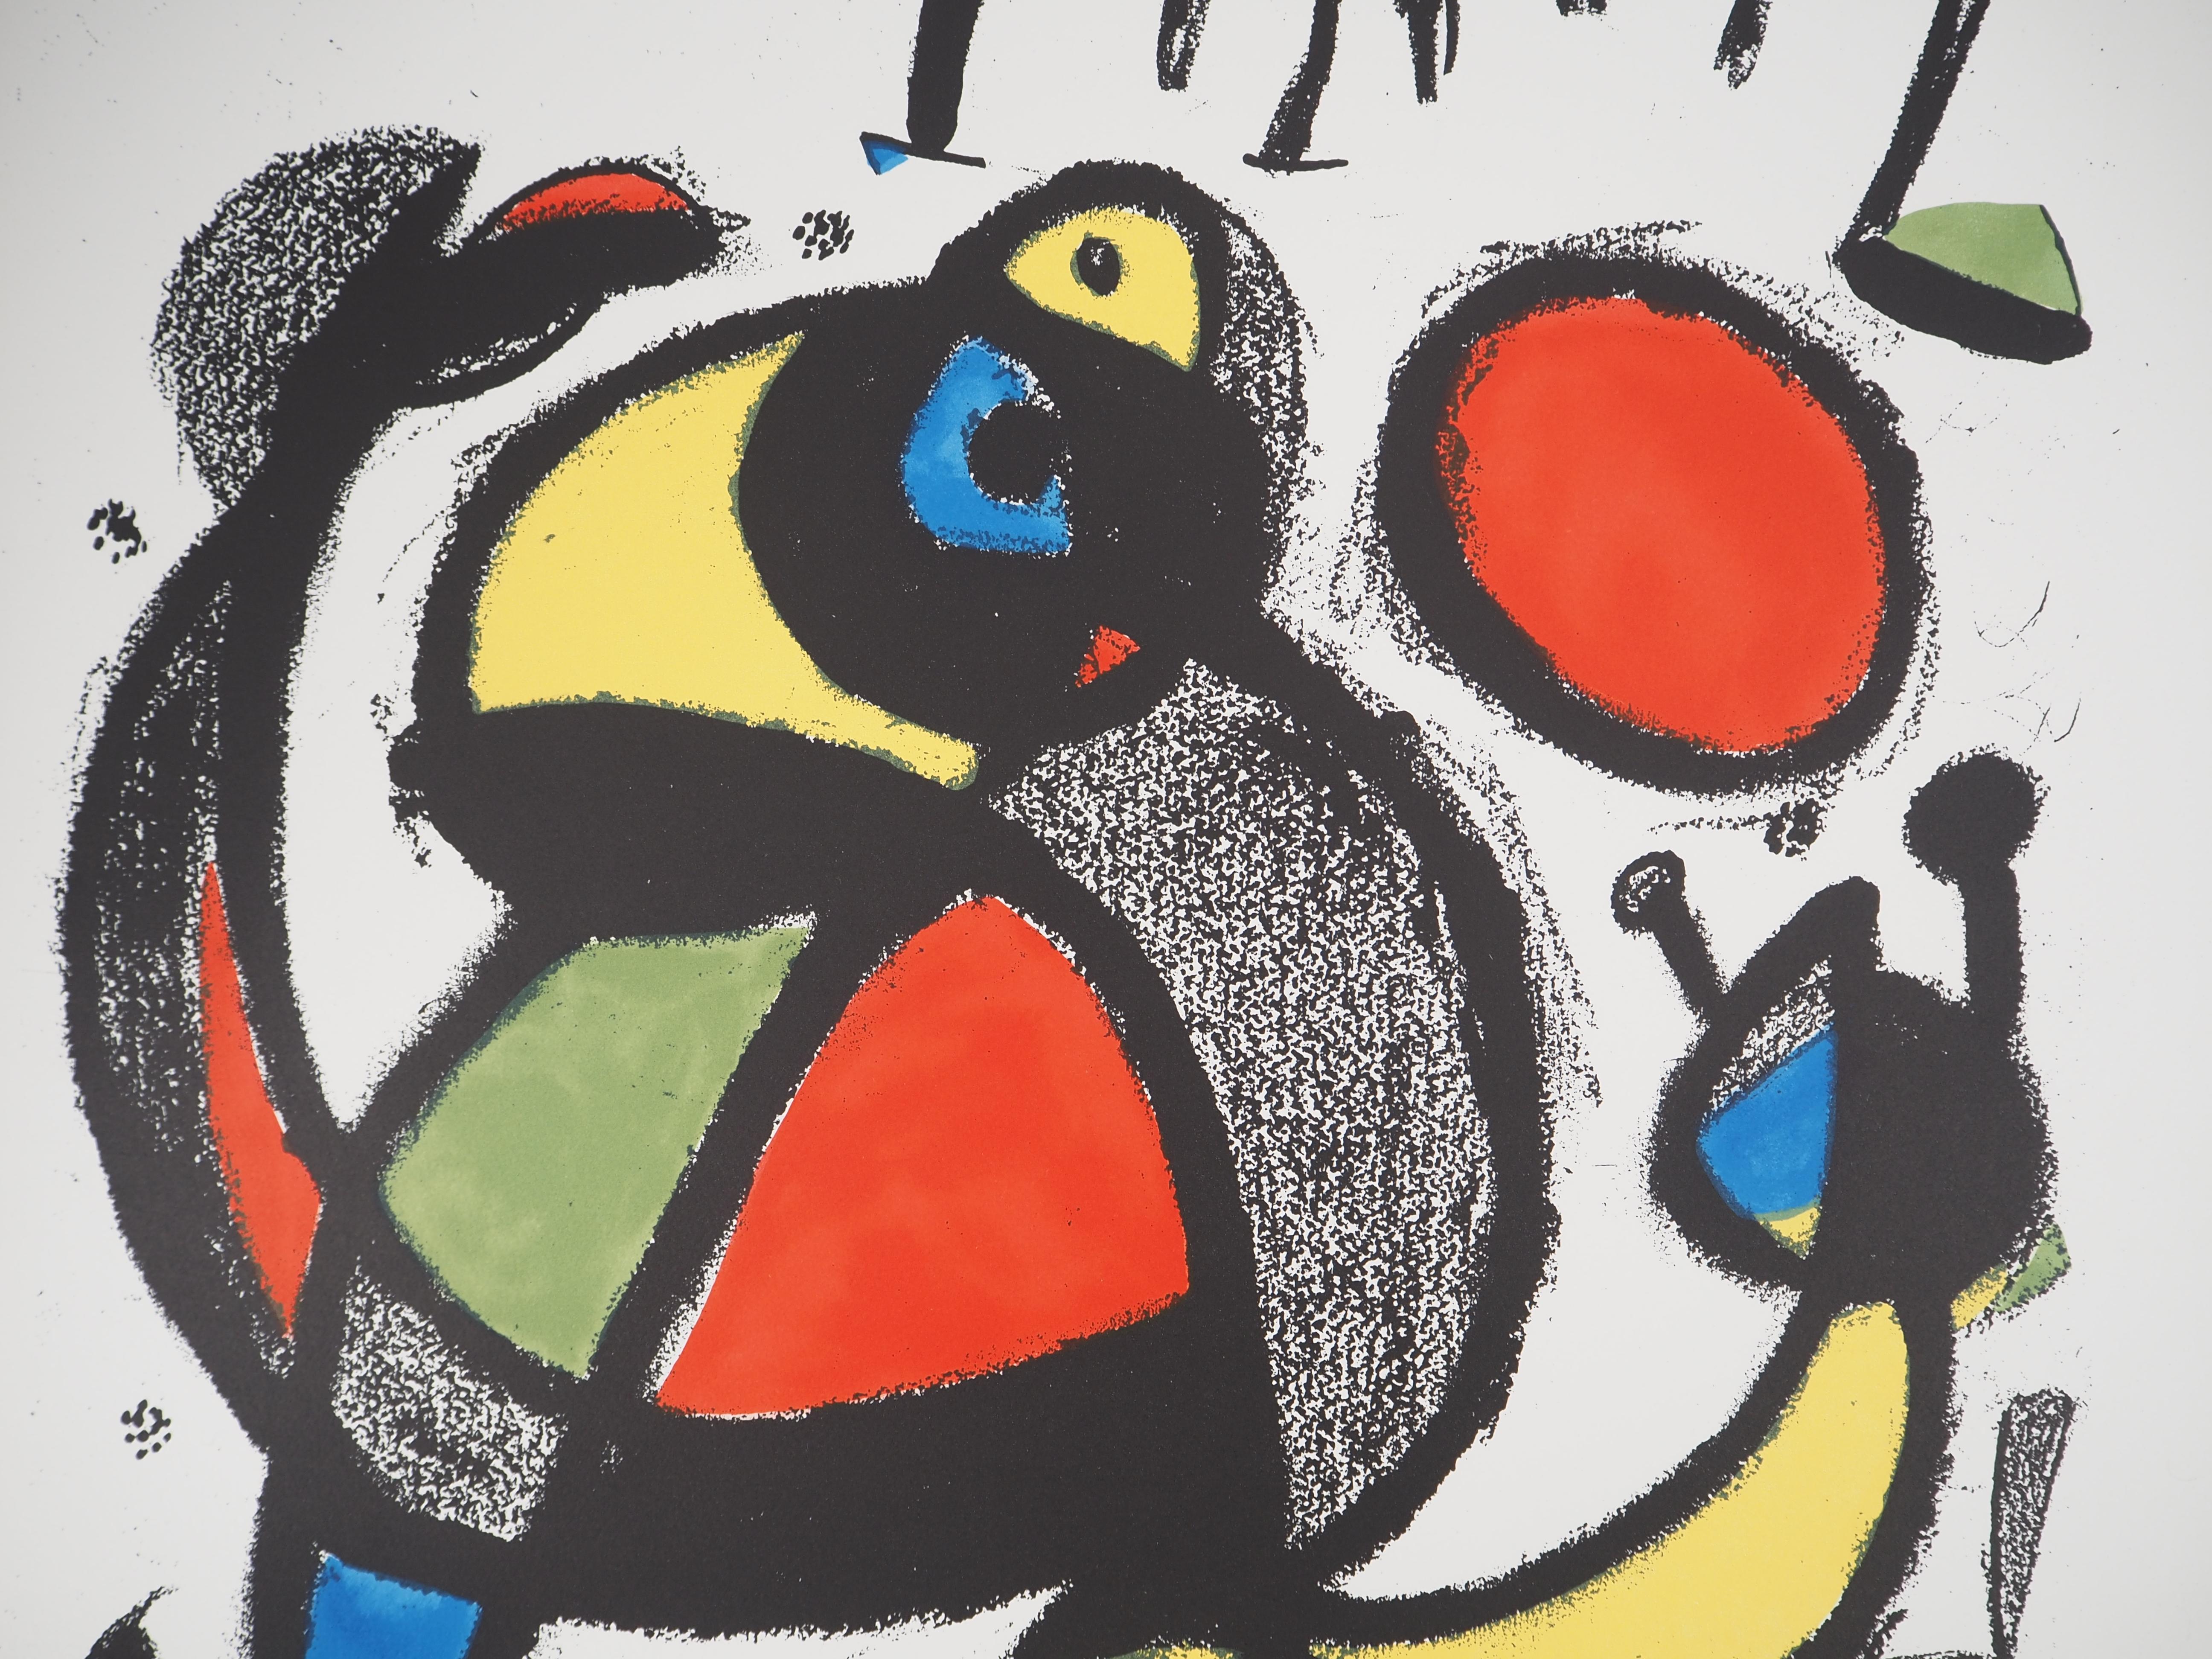 Joan MIRO
Espana 1982 

Original lithograph
Handsigned in pencil
Numbered / 150 copies
On vellum 95 x 60 cm (c. 38 x 24 inch)

REFERENCES : Catalog raisonne Mourlot #1250
Created by Miro to celebrate the 1982 Football - Fifa World Cup in